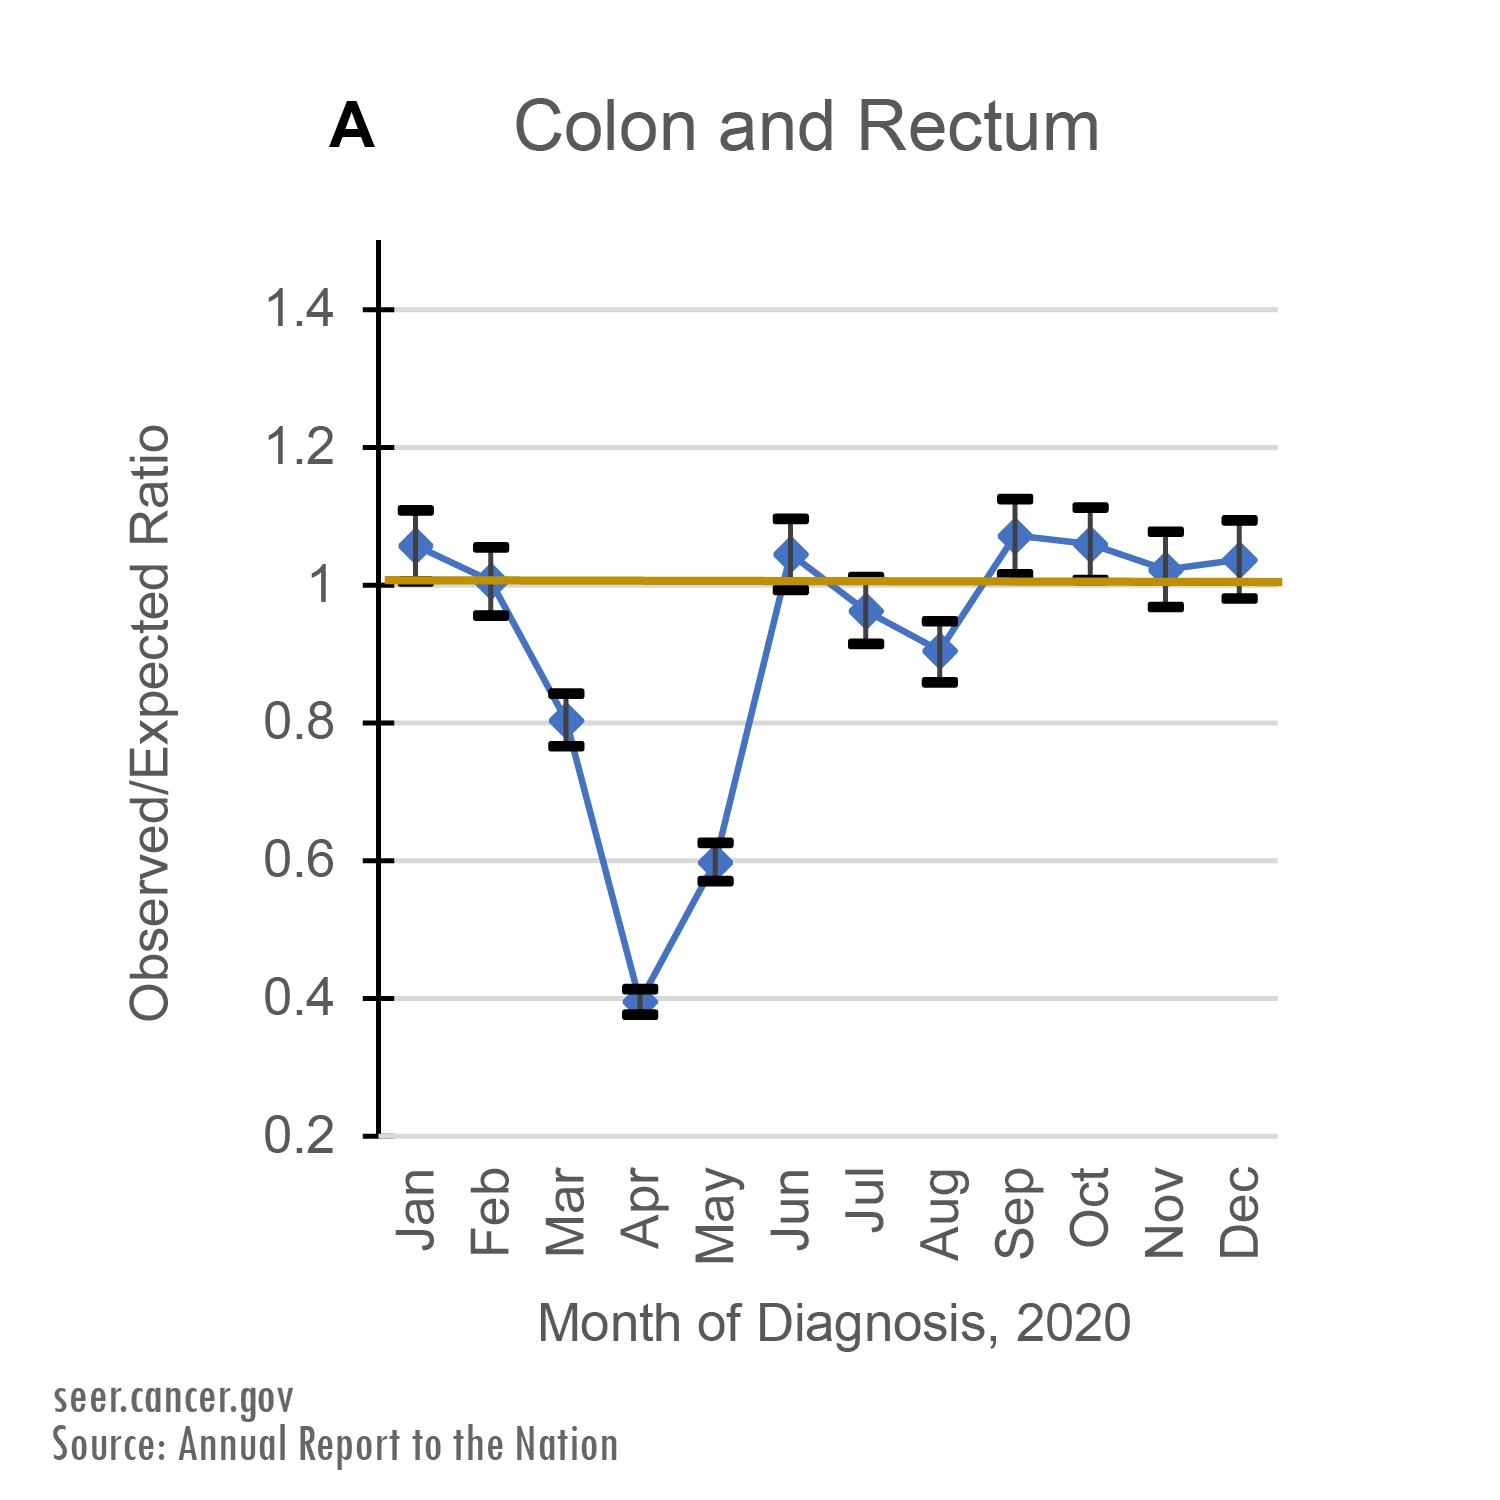 Observed/Expected Ratio of Colorectal cancer diagnoses by Month of Diagnosis, 2020